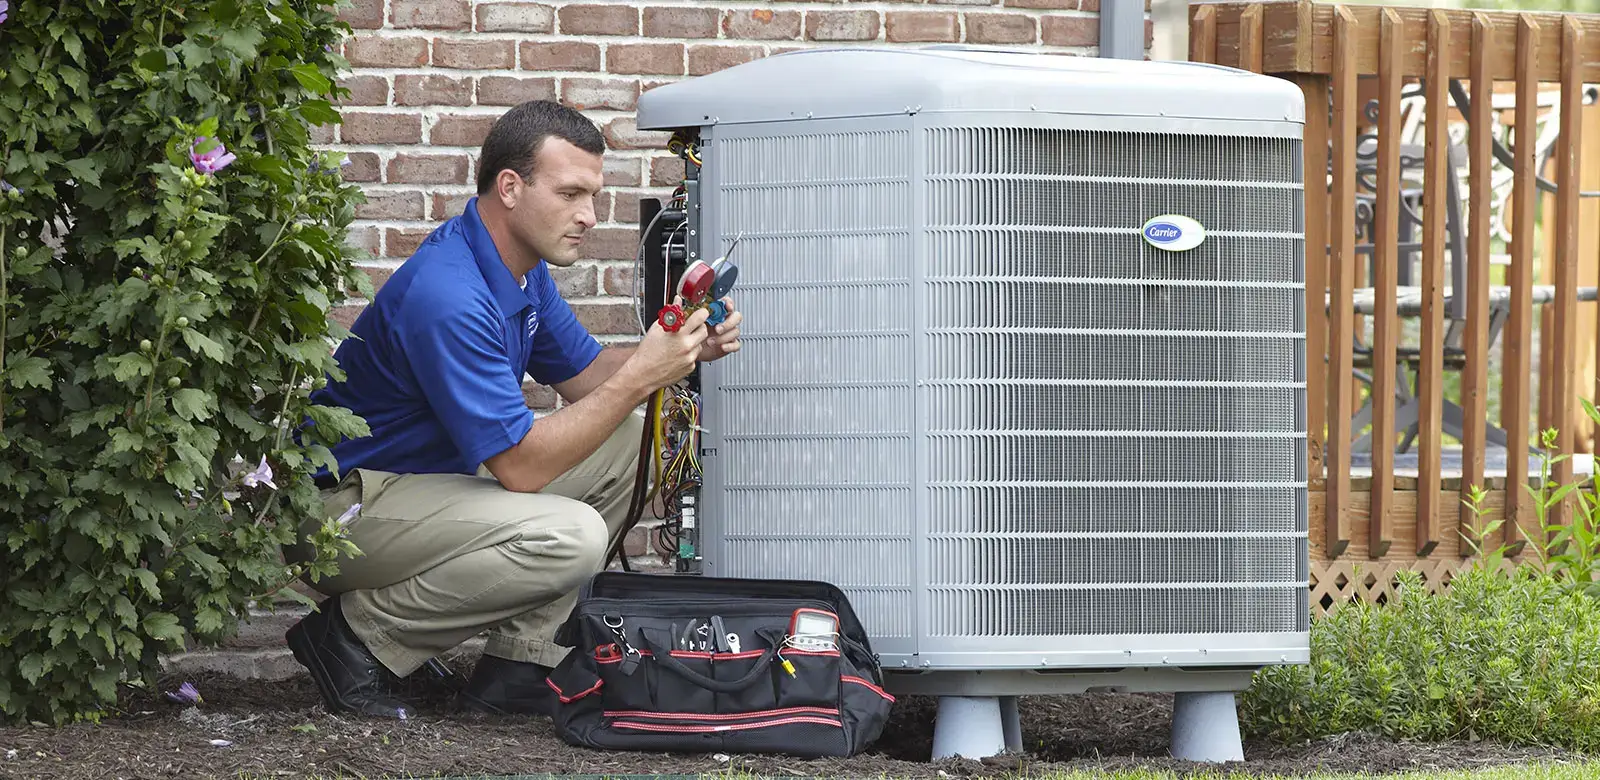 Residential Heating & Air Conditioning Service and Repairs